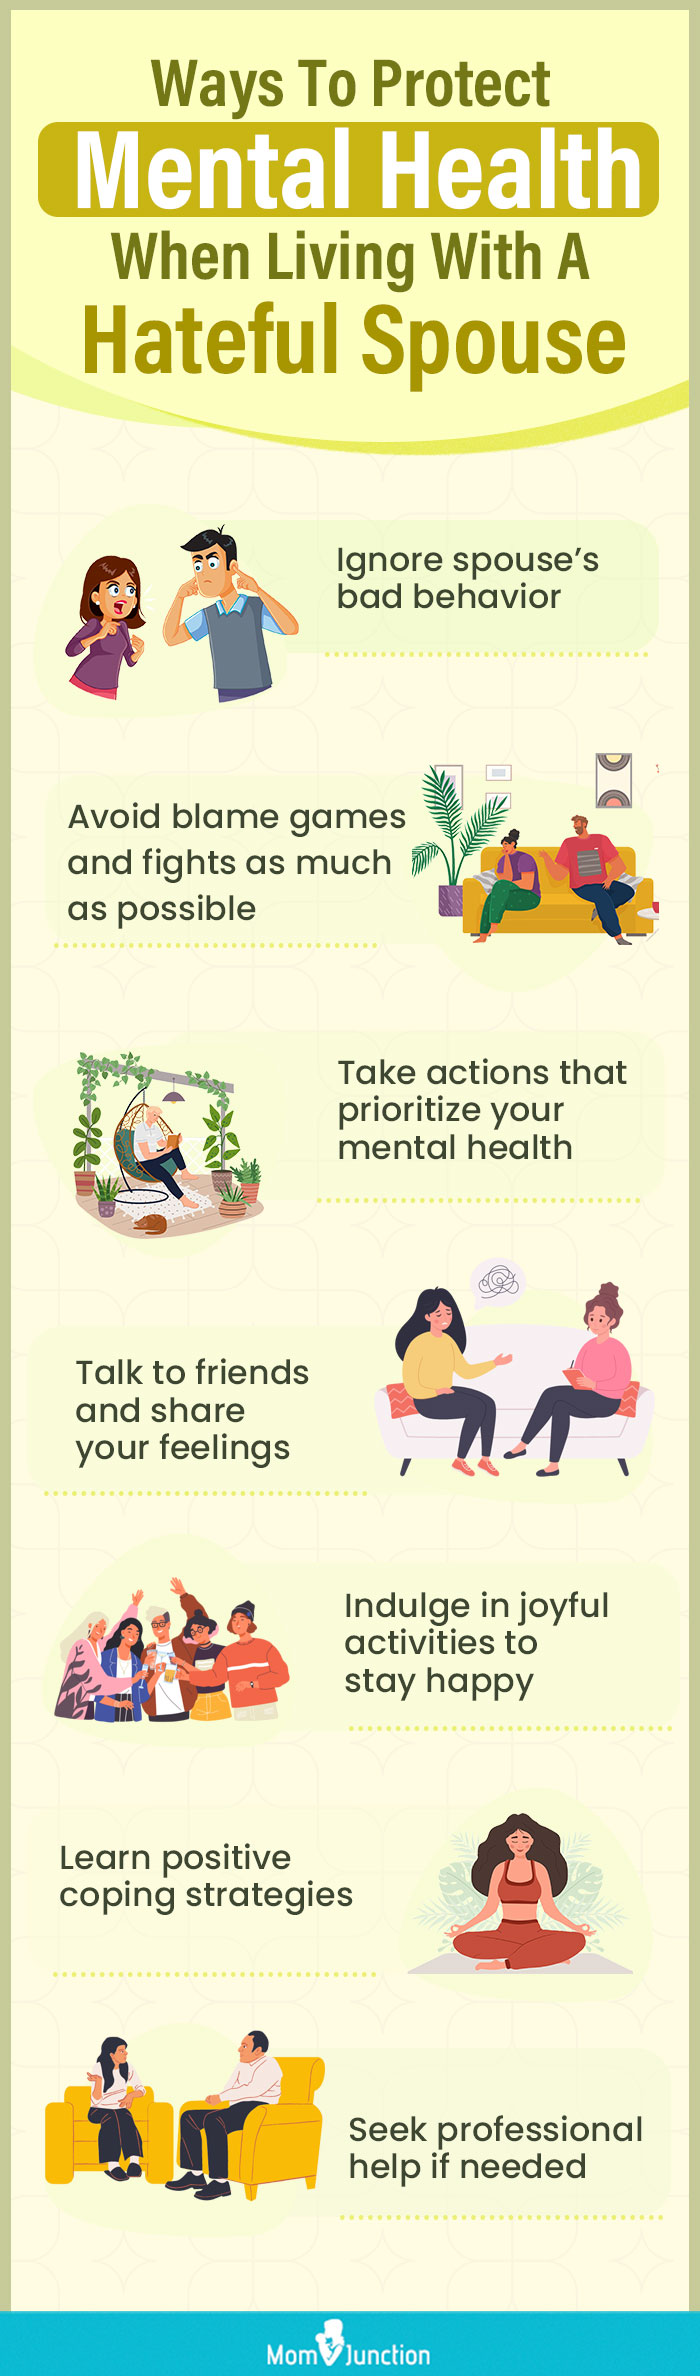 mental well being when coping with a resentful spouse [infographic]